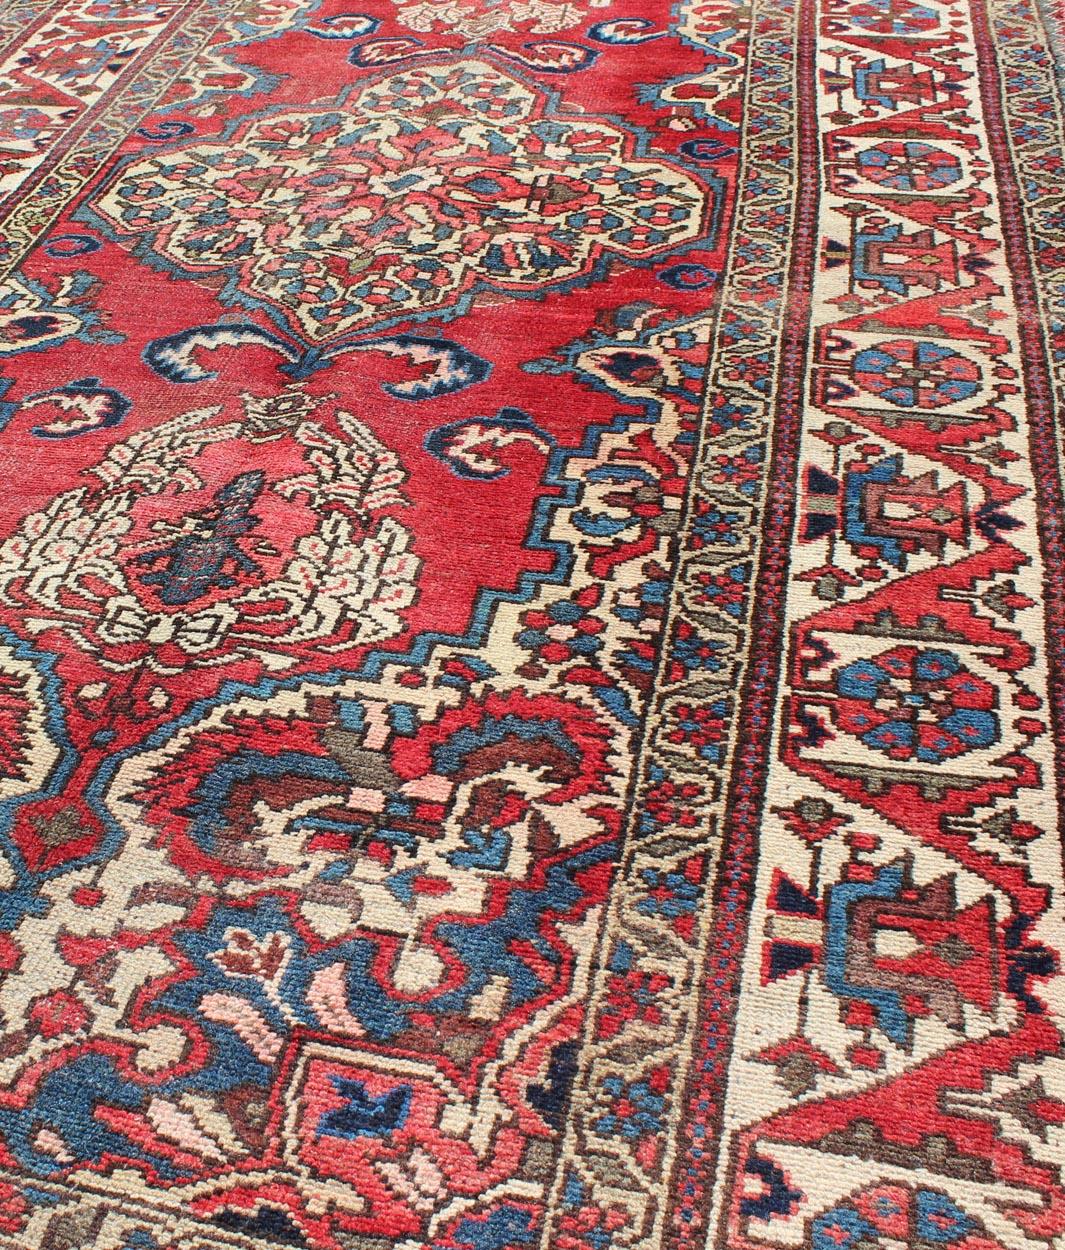 Vintage Persian Bakhtiari Rug with Ornate Central Medallion and Rich Red Blue In Good Condition For Sale In Atlanta, GA